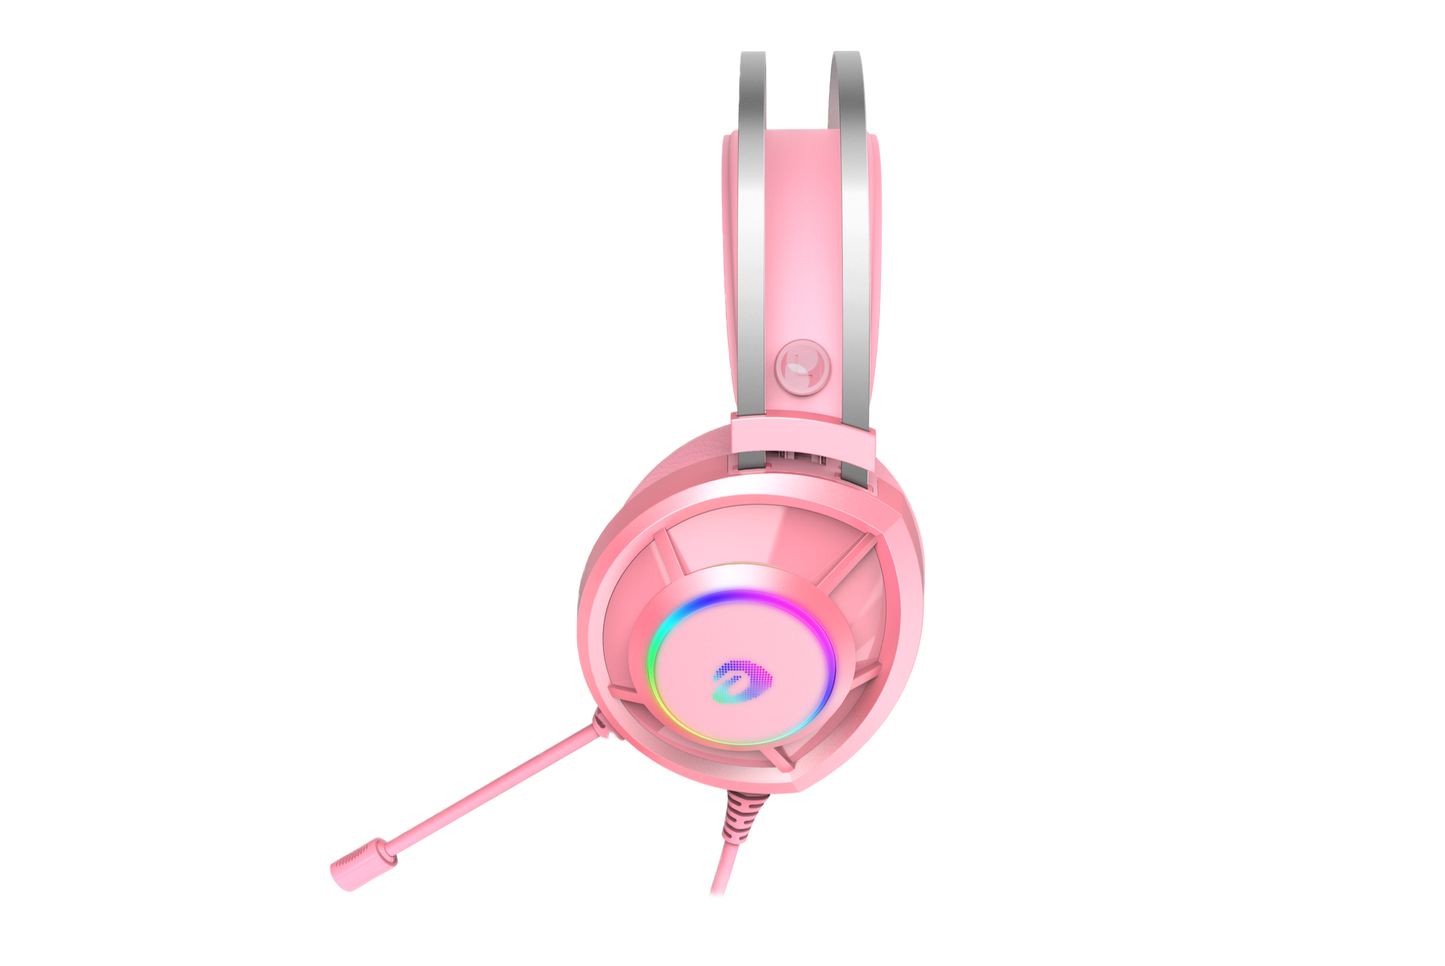 Dareu Gaming Headset with Microphone LED Light